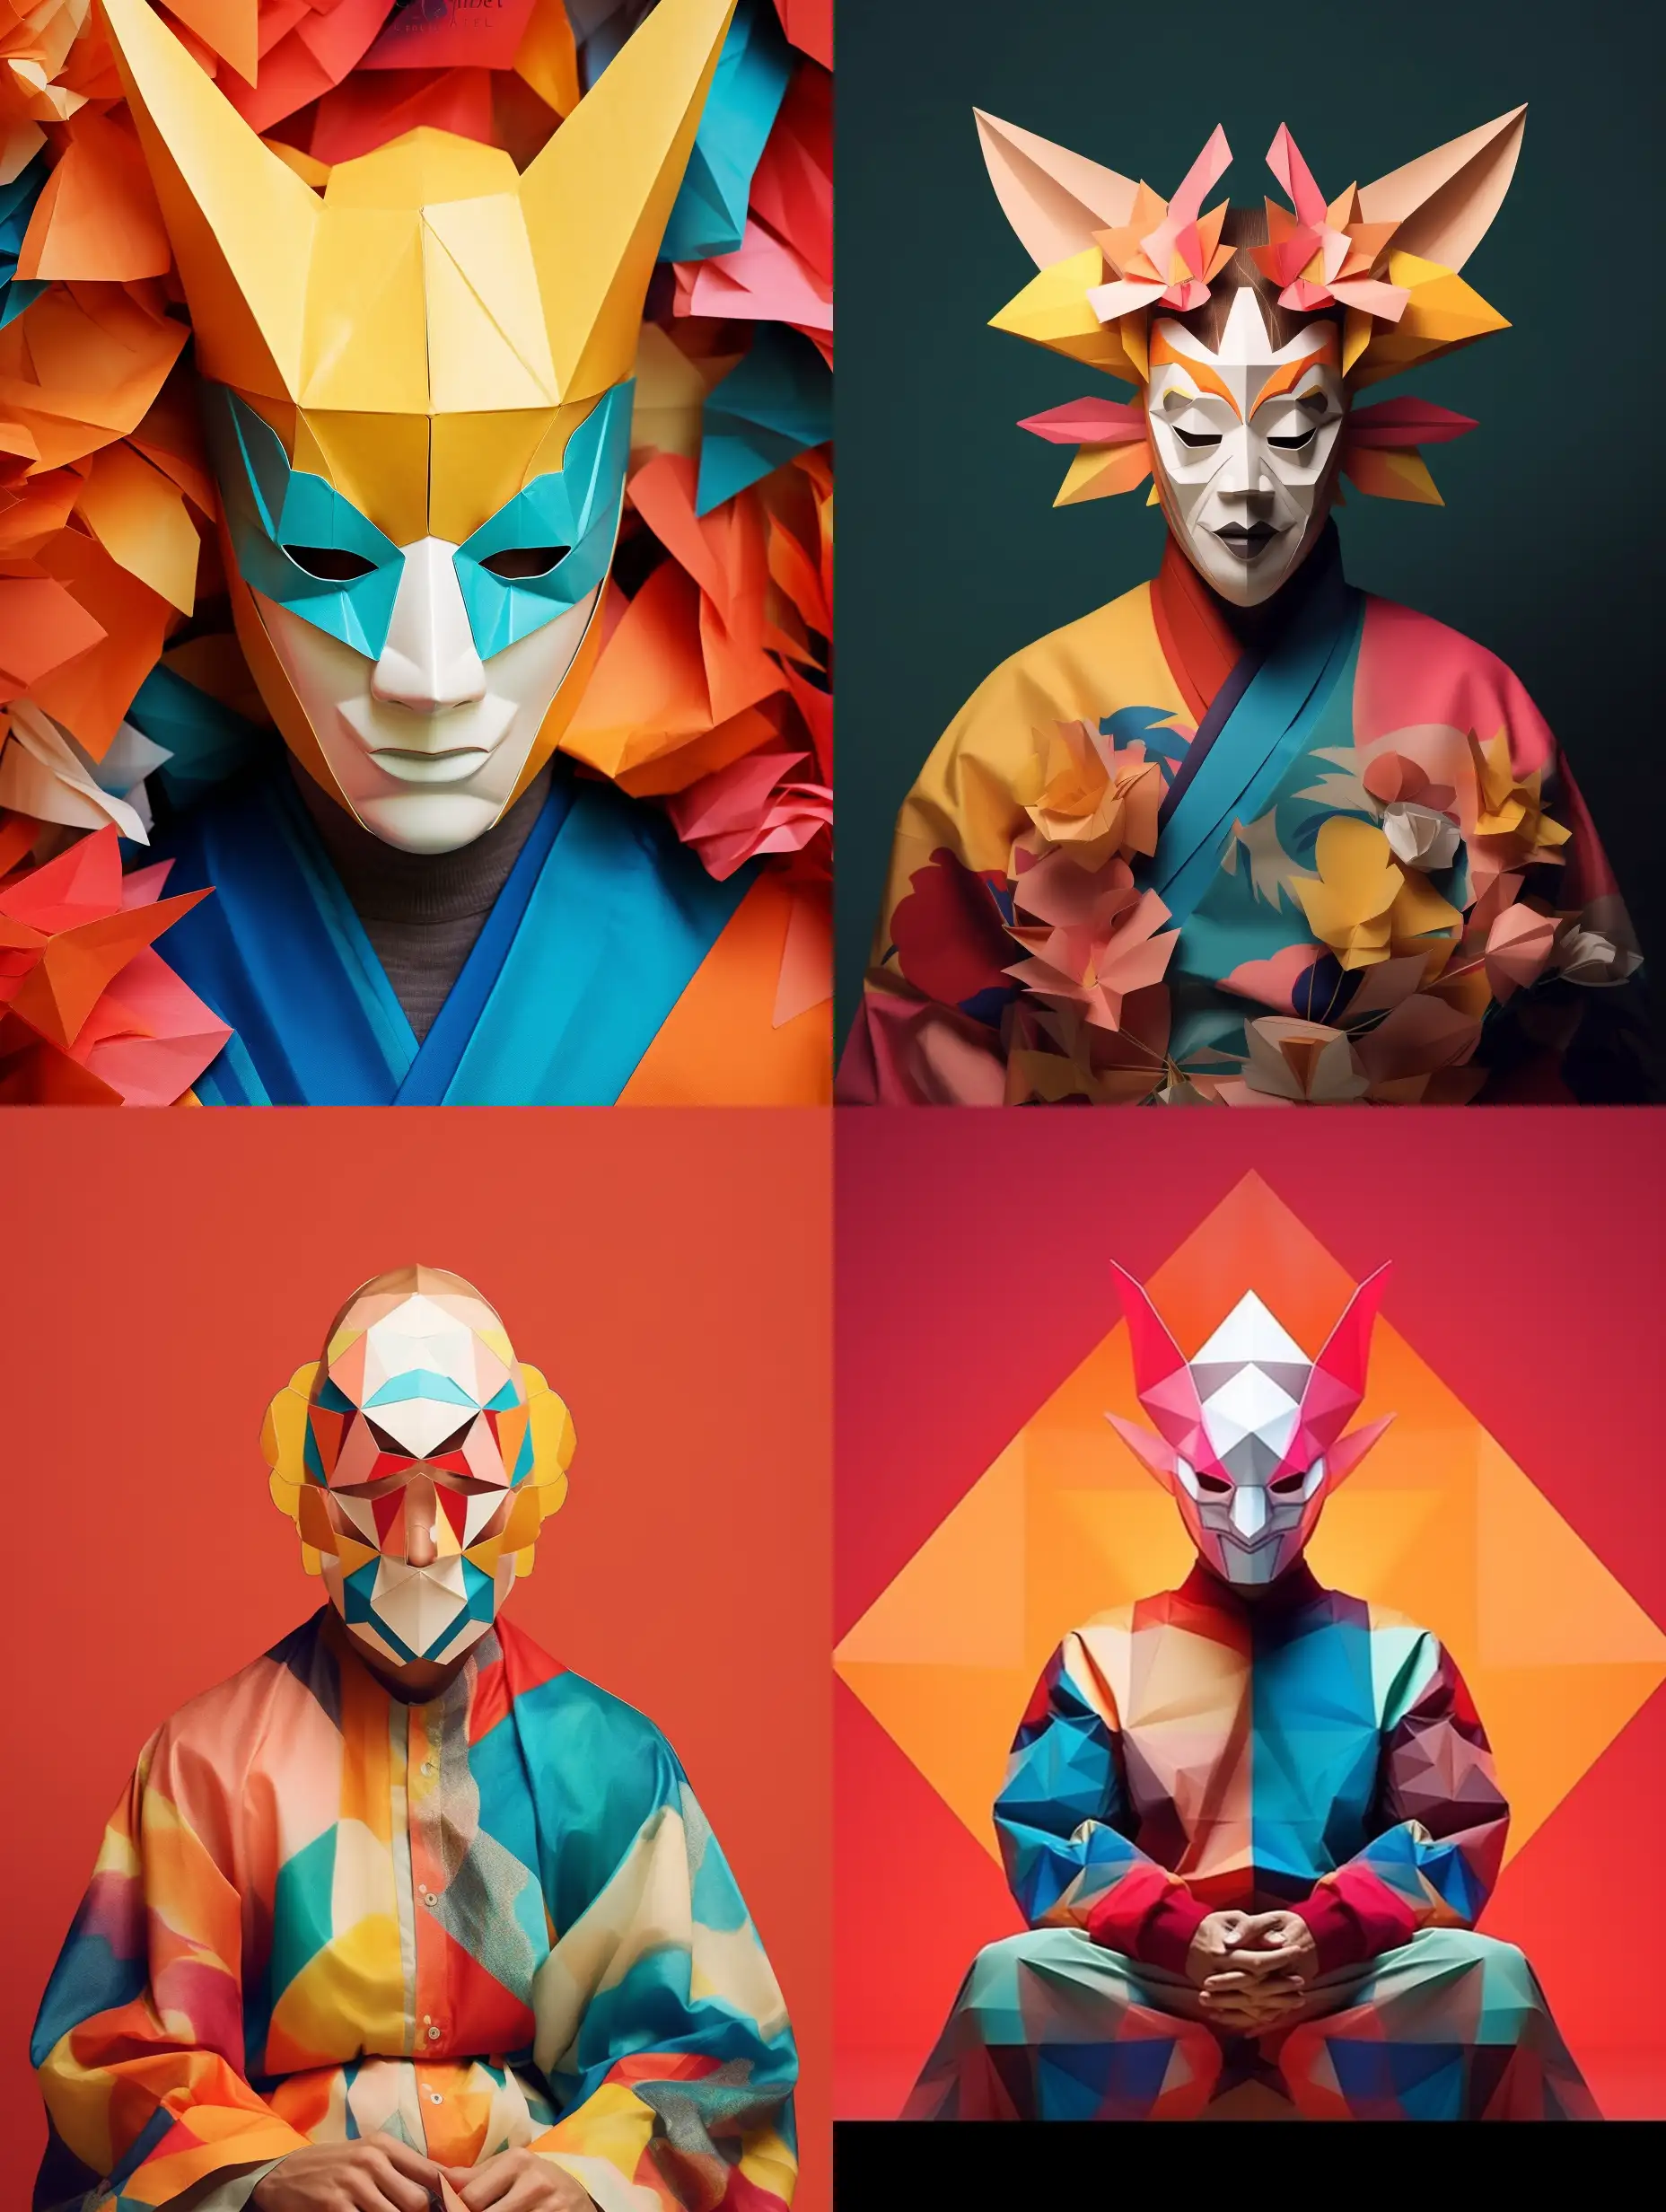 Colorful-Robed-Figure-with-Origami-Glass-Wooden-Mask-in-Minimalistic-Kodak-Realistic-Style